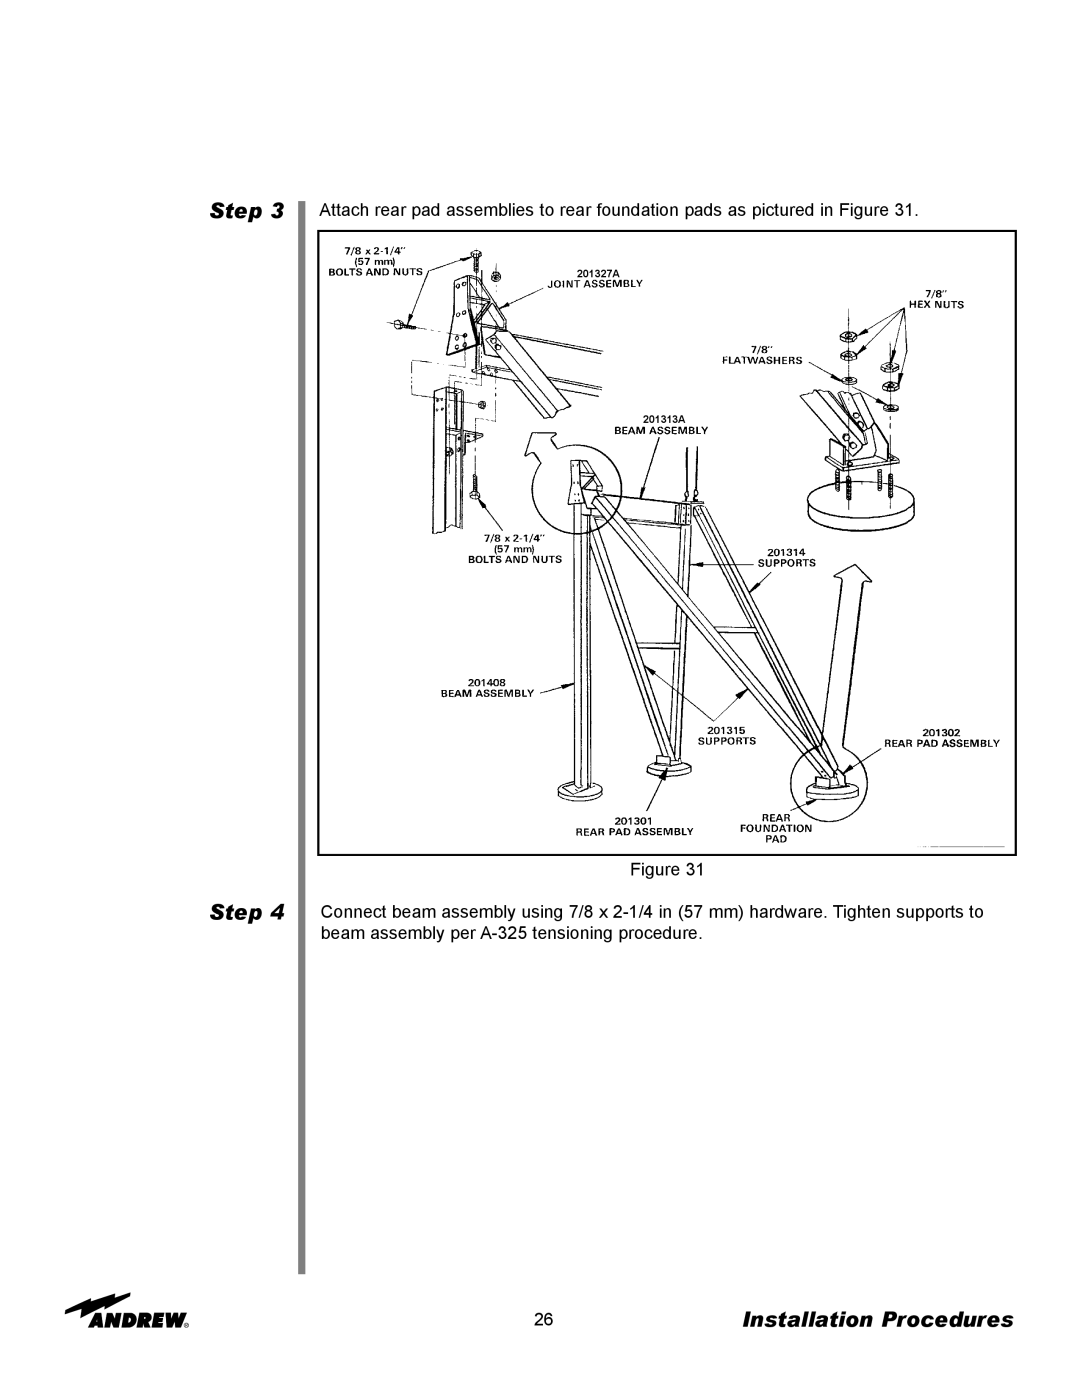 Andrew ES73 manual Step Step, Installation Procedures, Figure, 201327A 201313A 